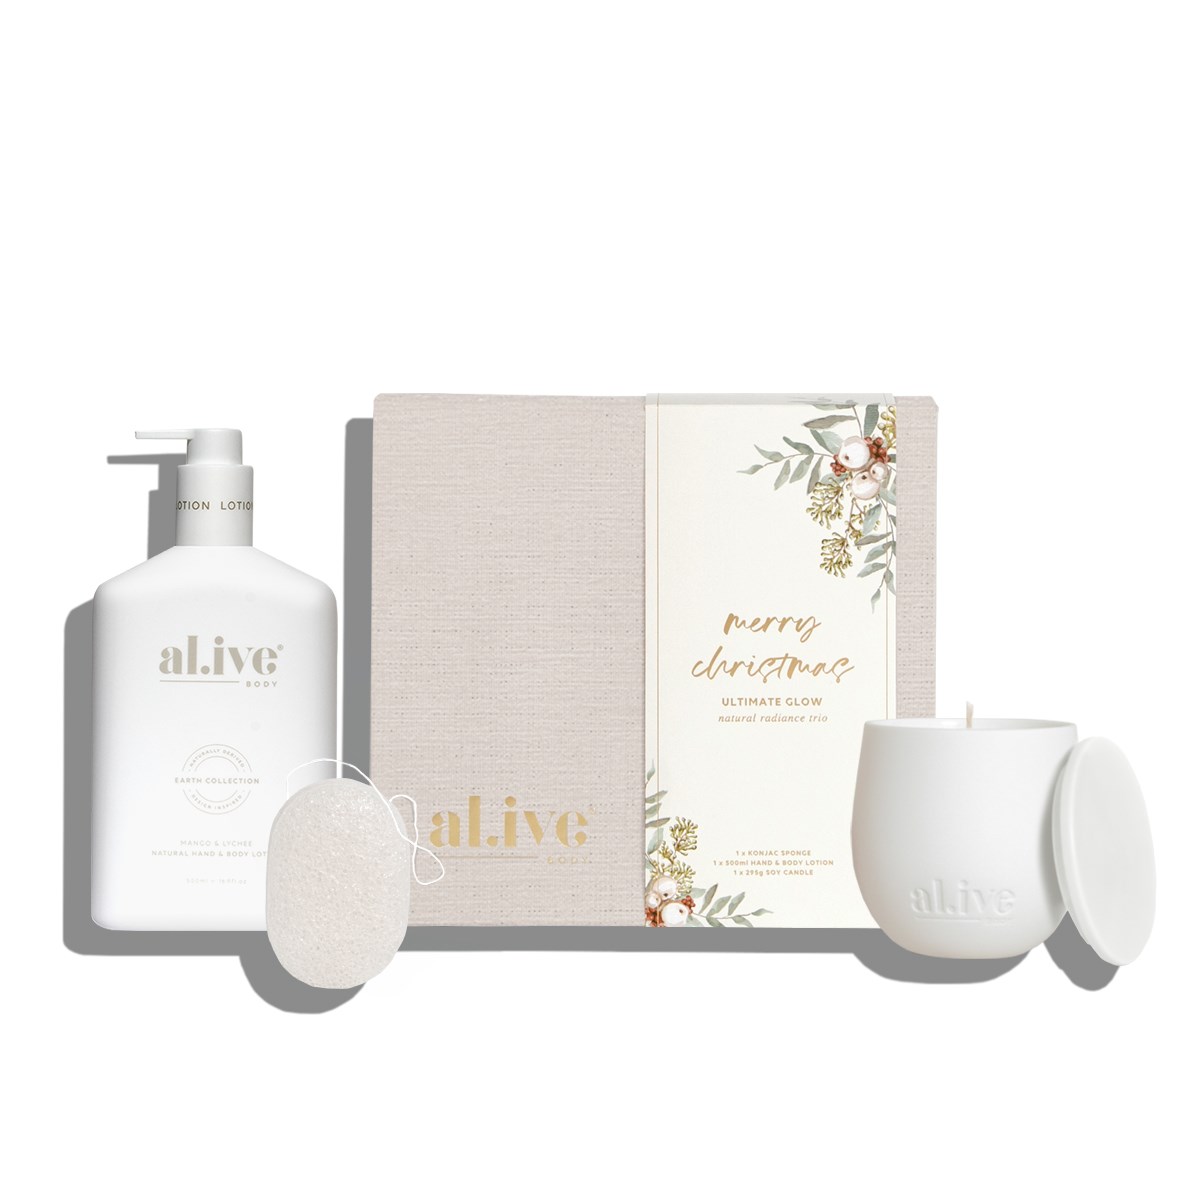 Alive Body Ultimate Glow gift set $107.00